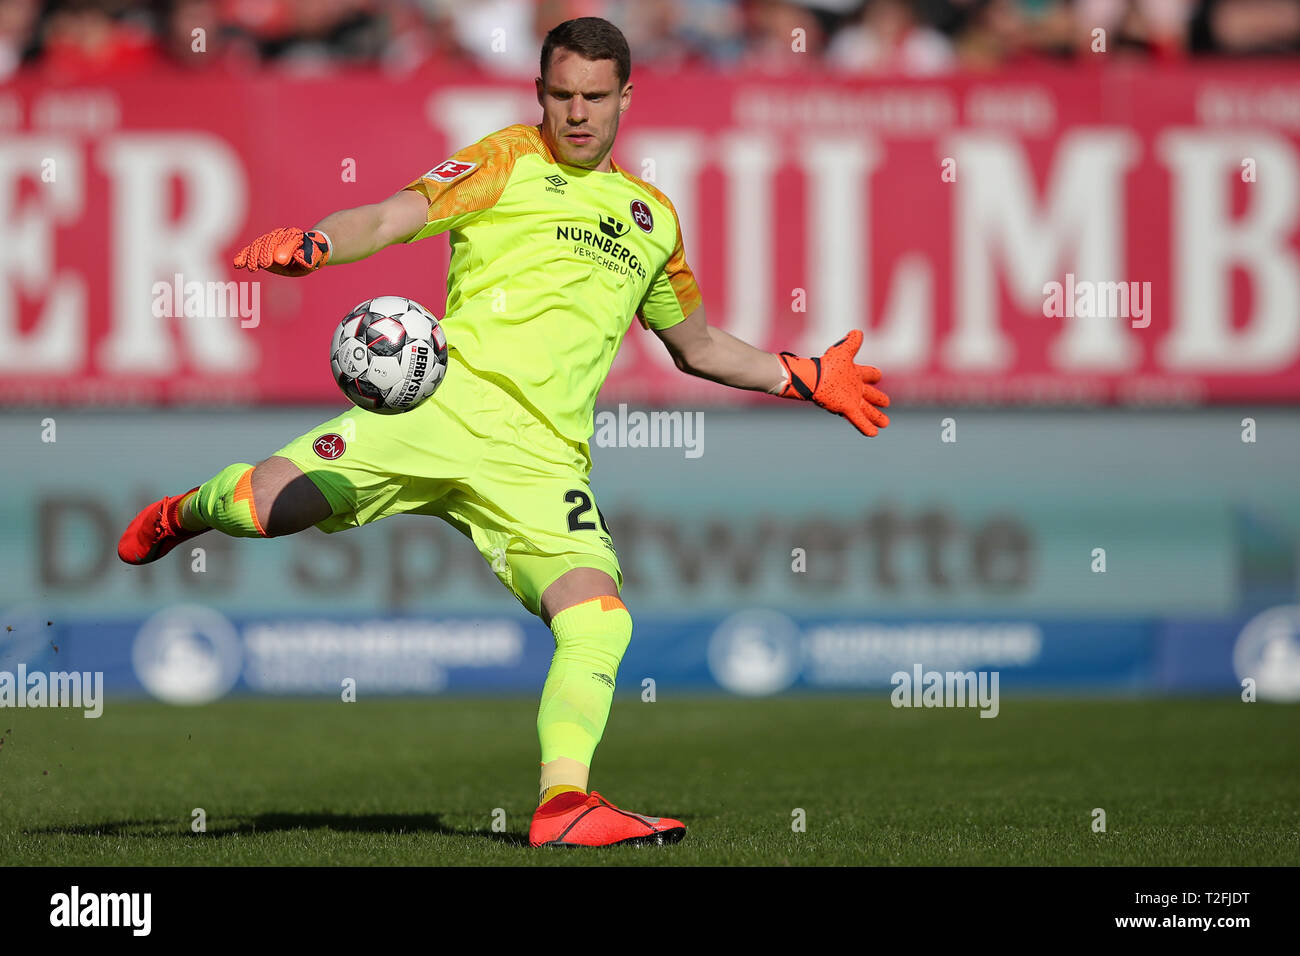 30 March 2019, Bavaria, Nürnberg: Soccer: Bundesliga, 1st FC Nuremberg - FC Augsburg, 27th matchday in Max Morlock Stadium. Nuremberg goalkeeper Christian Mathenia plays the ball. Photo: Daniel Karmann/dpa - IMPORTANT NOTE: In accordance with the requirements of the DFL Deutsche Fußball Liga or the DFB Deutscher Fußball-Bund, it is prohibited to use or have used photographs taken in the stadium and/or the match in the form of sequence images and/or video-like photo sequences. Stock Photo